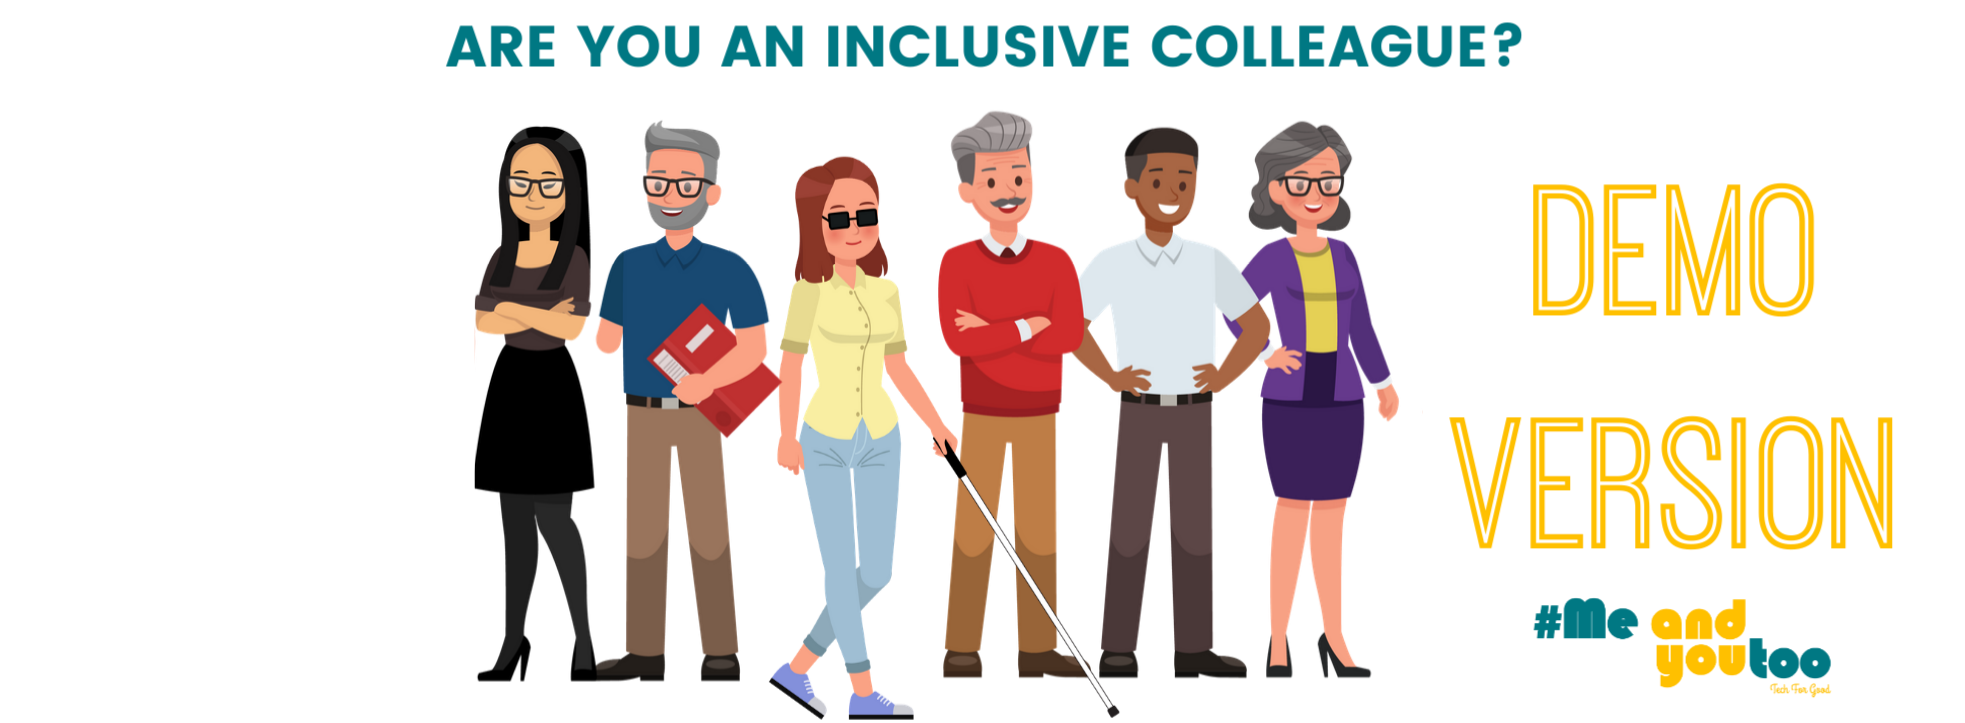 are you an inclusive colleague?